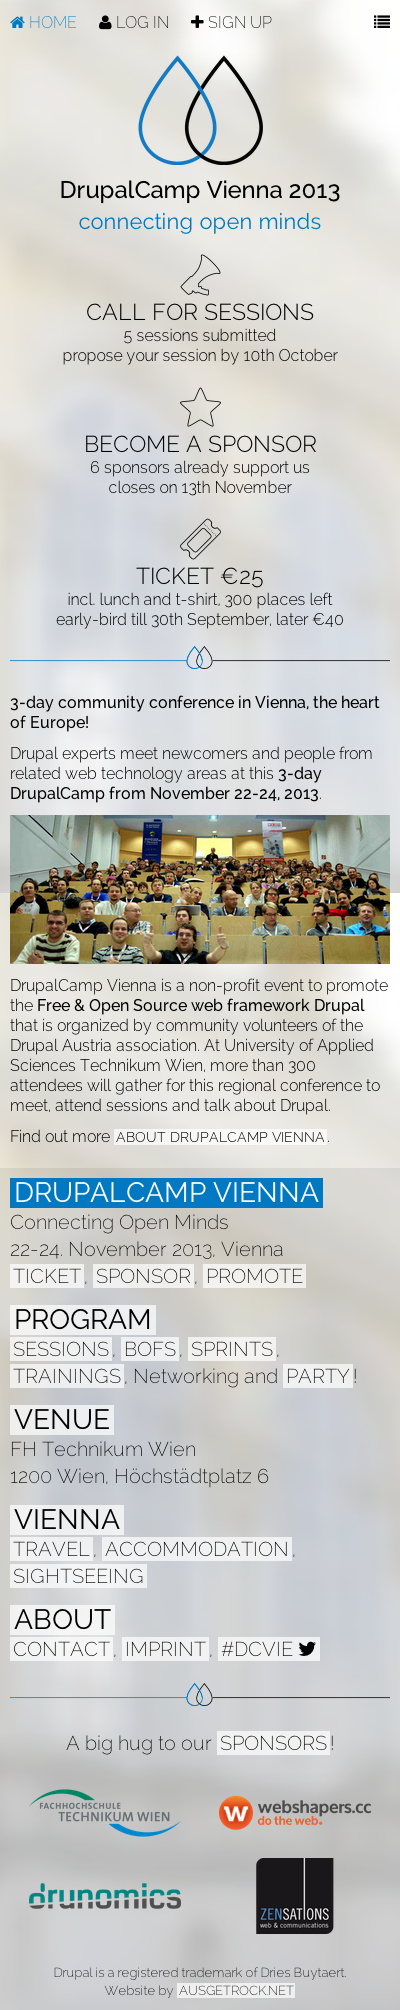 Drupalcamp Vienna 2013 - Connecting Open Minds - Screenshot Frontpage MOBILE